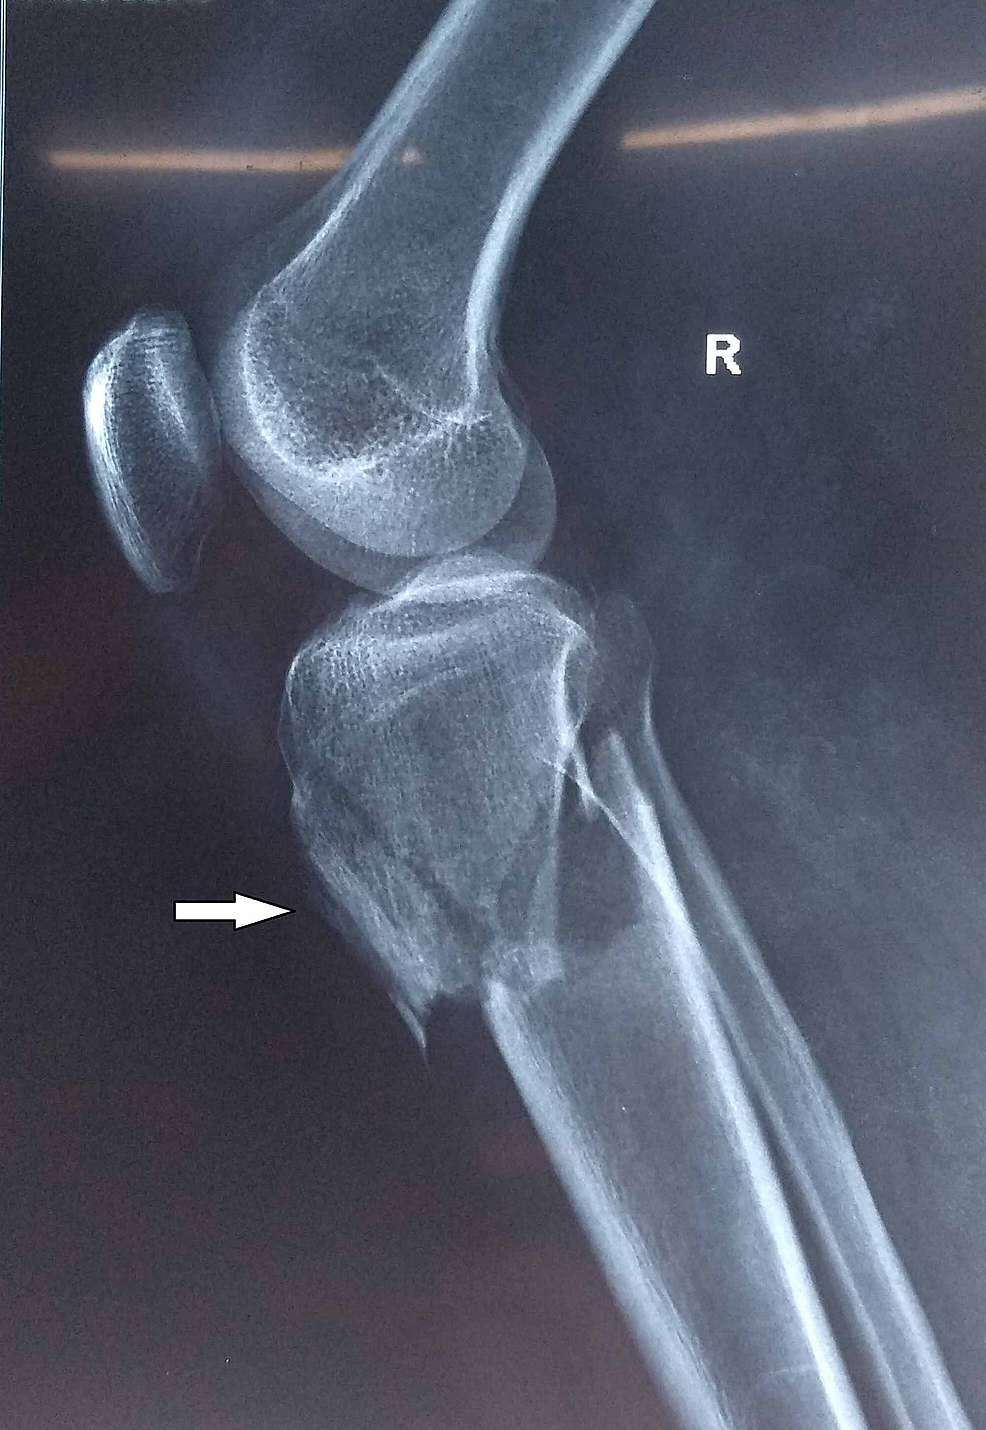 tibial plateau fracture swelling